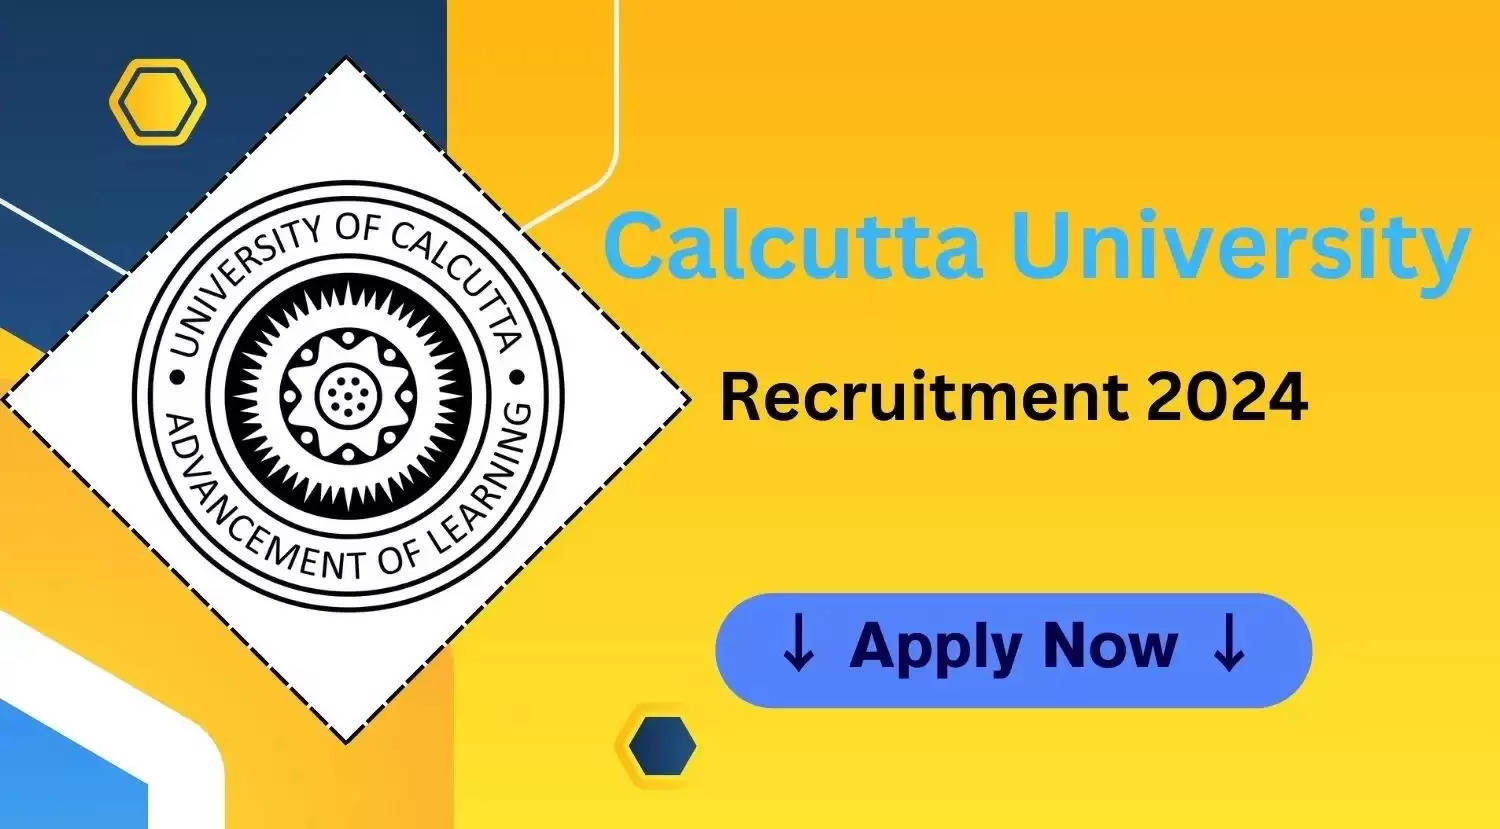 Calcutta University Recruitment 2024: Selection Process and Walk-in Interview Schedule Revealed